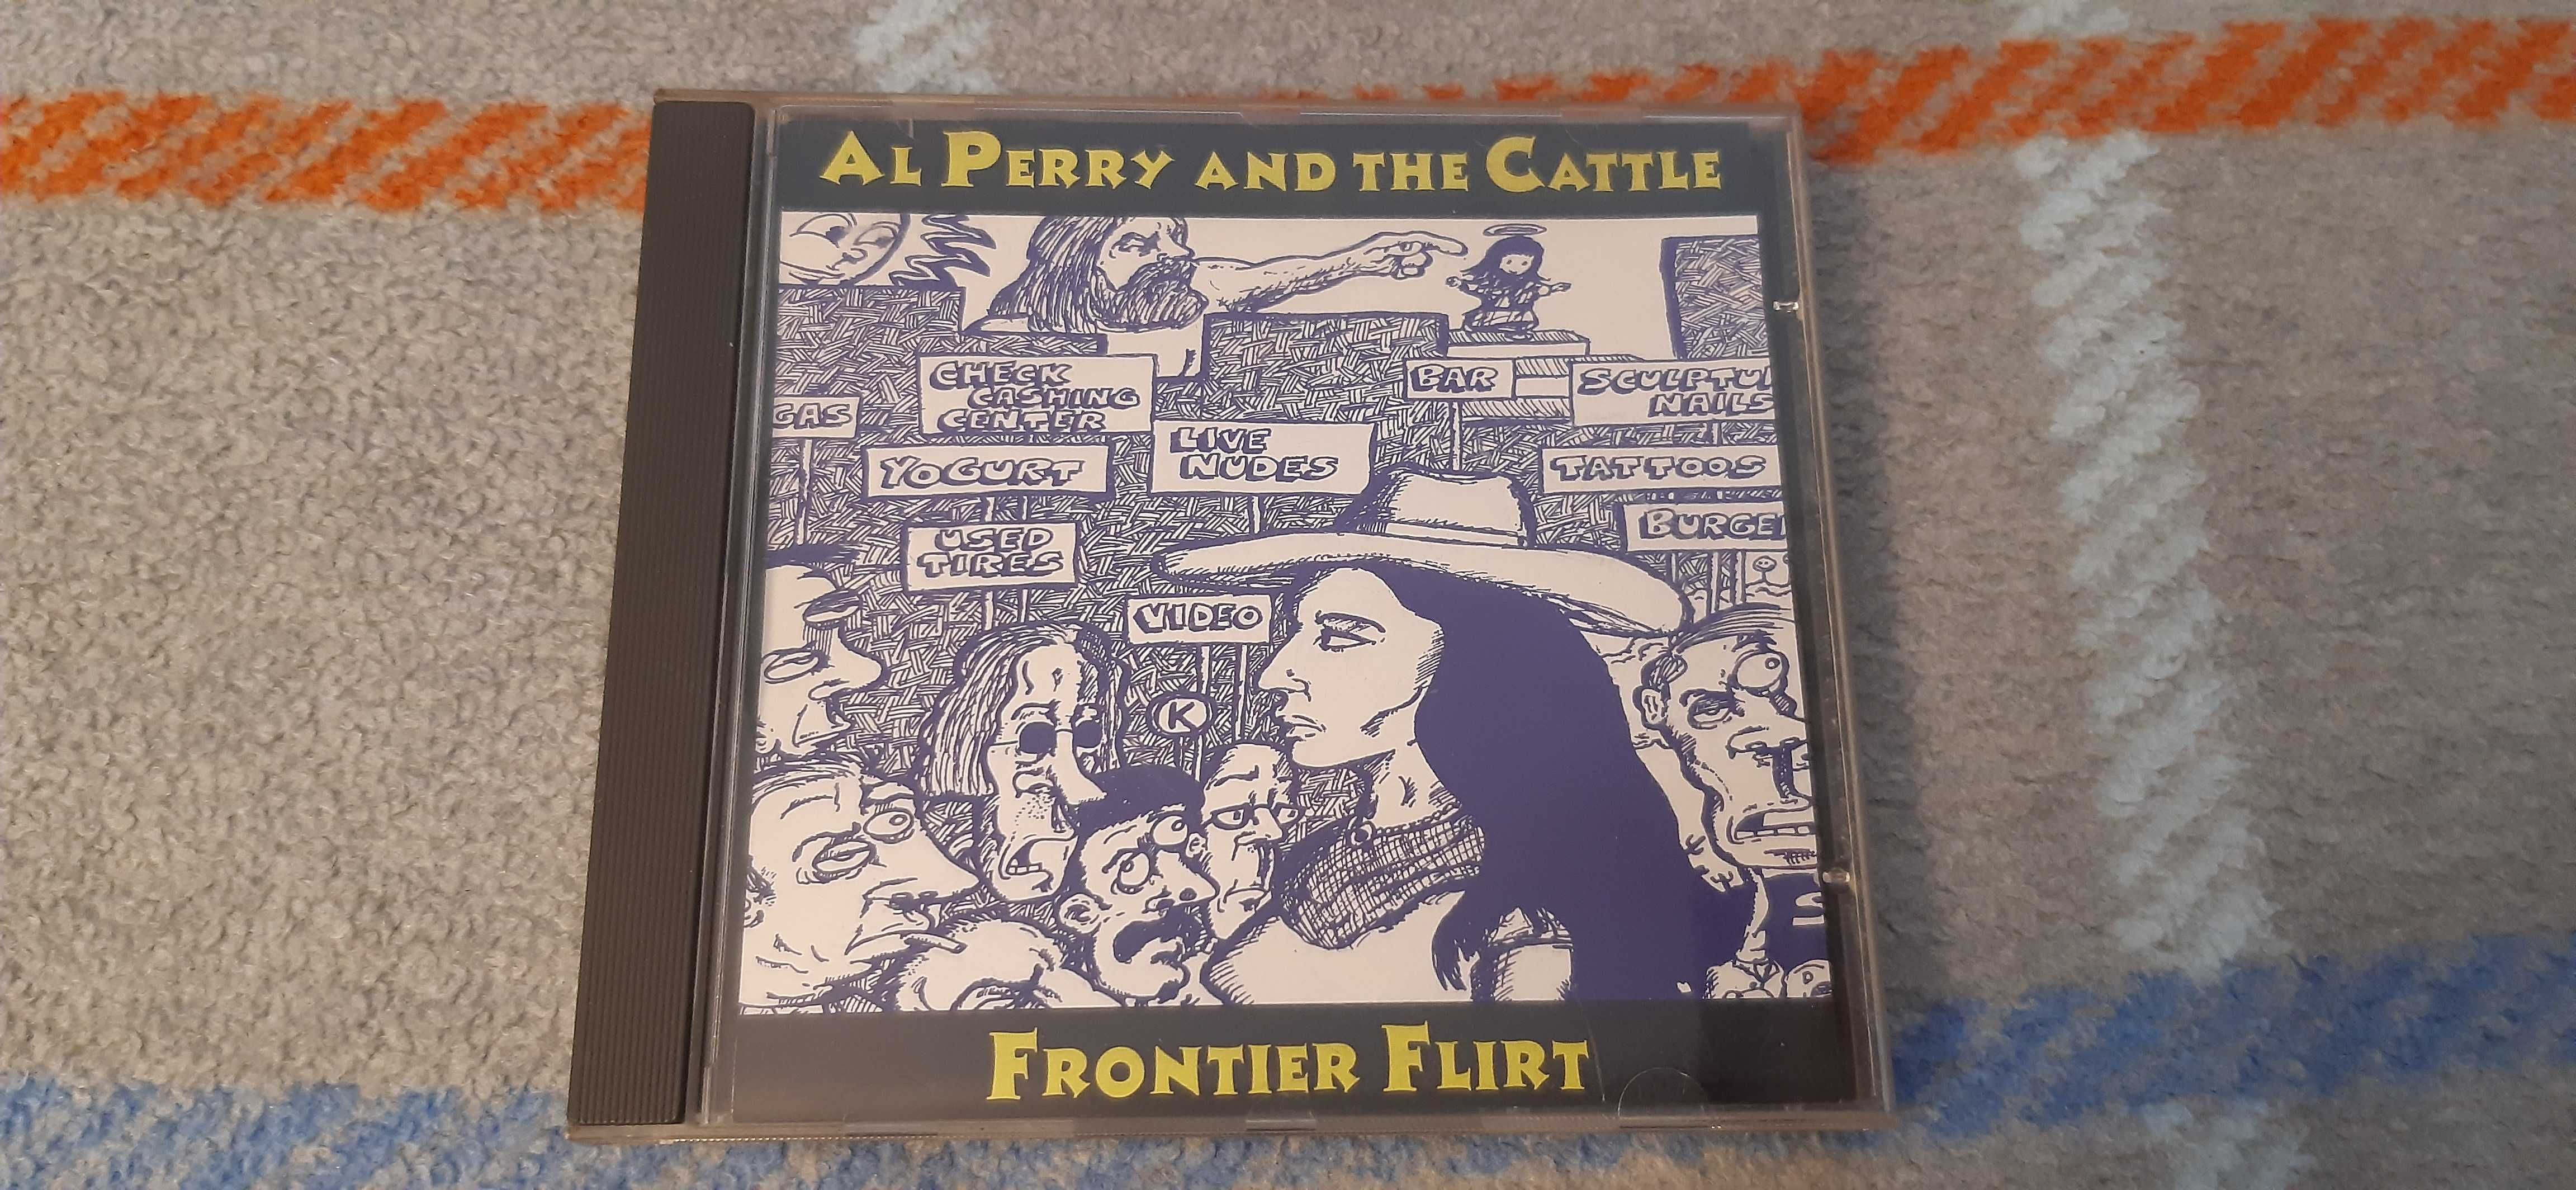 cd al perry and the cattle frontier flirt